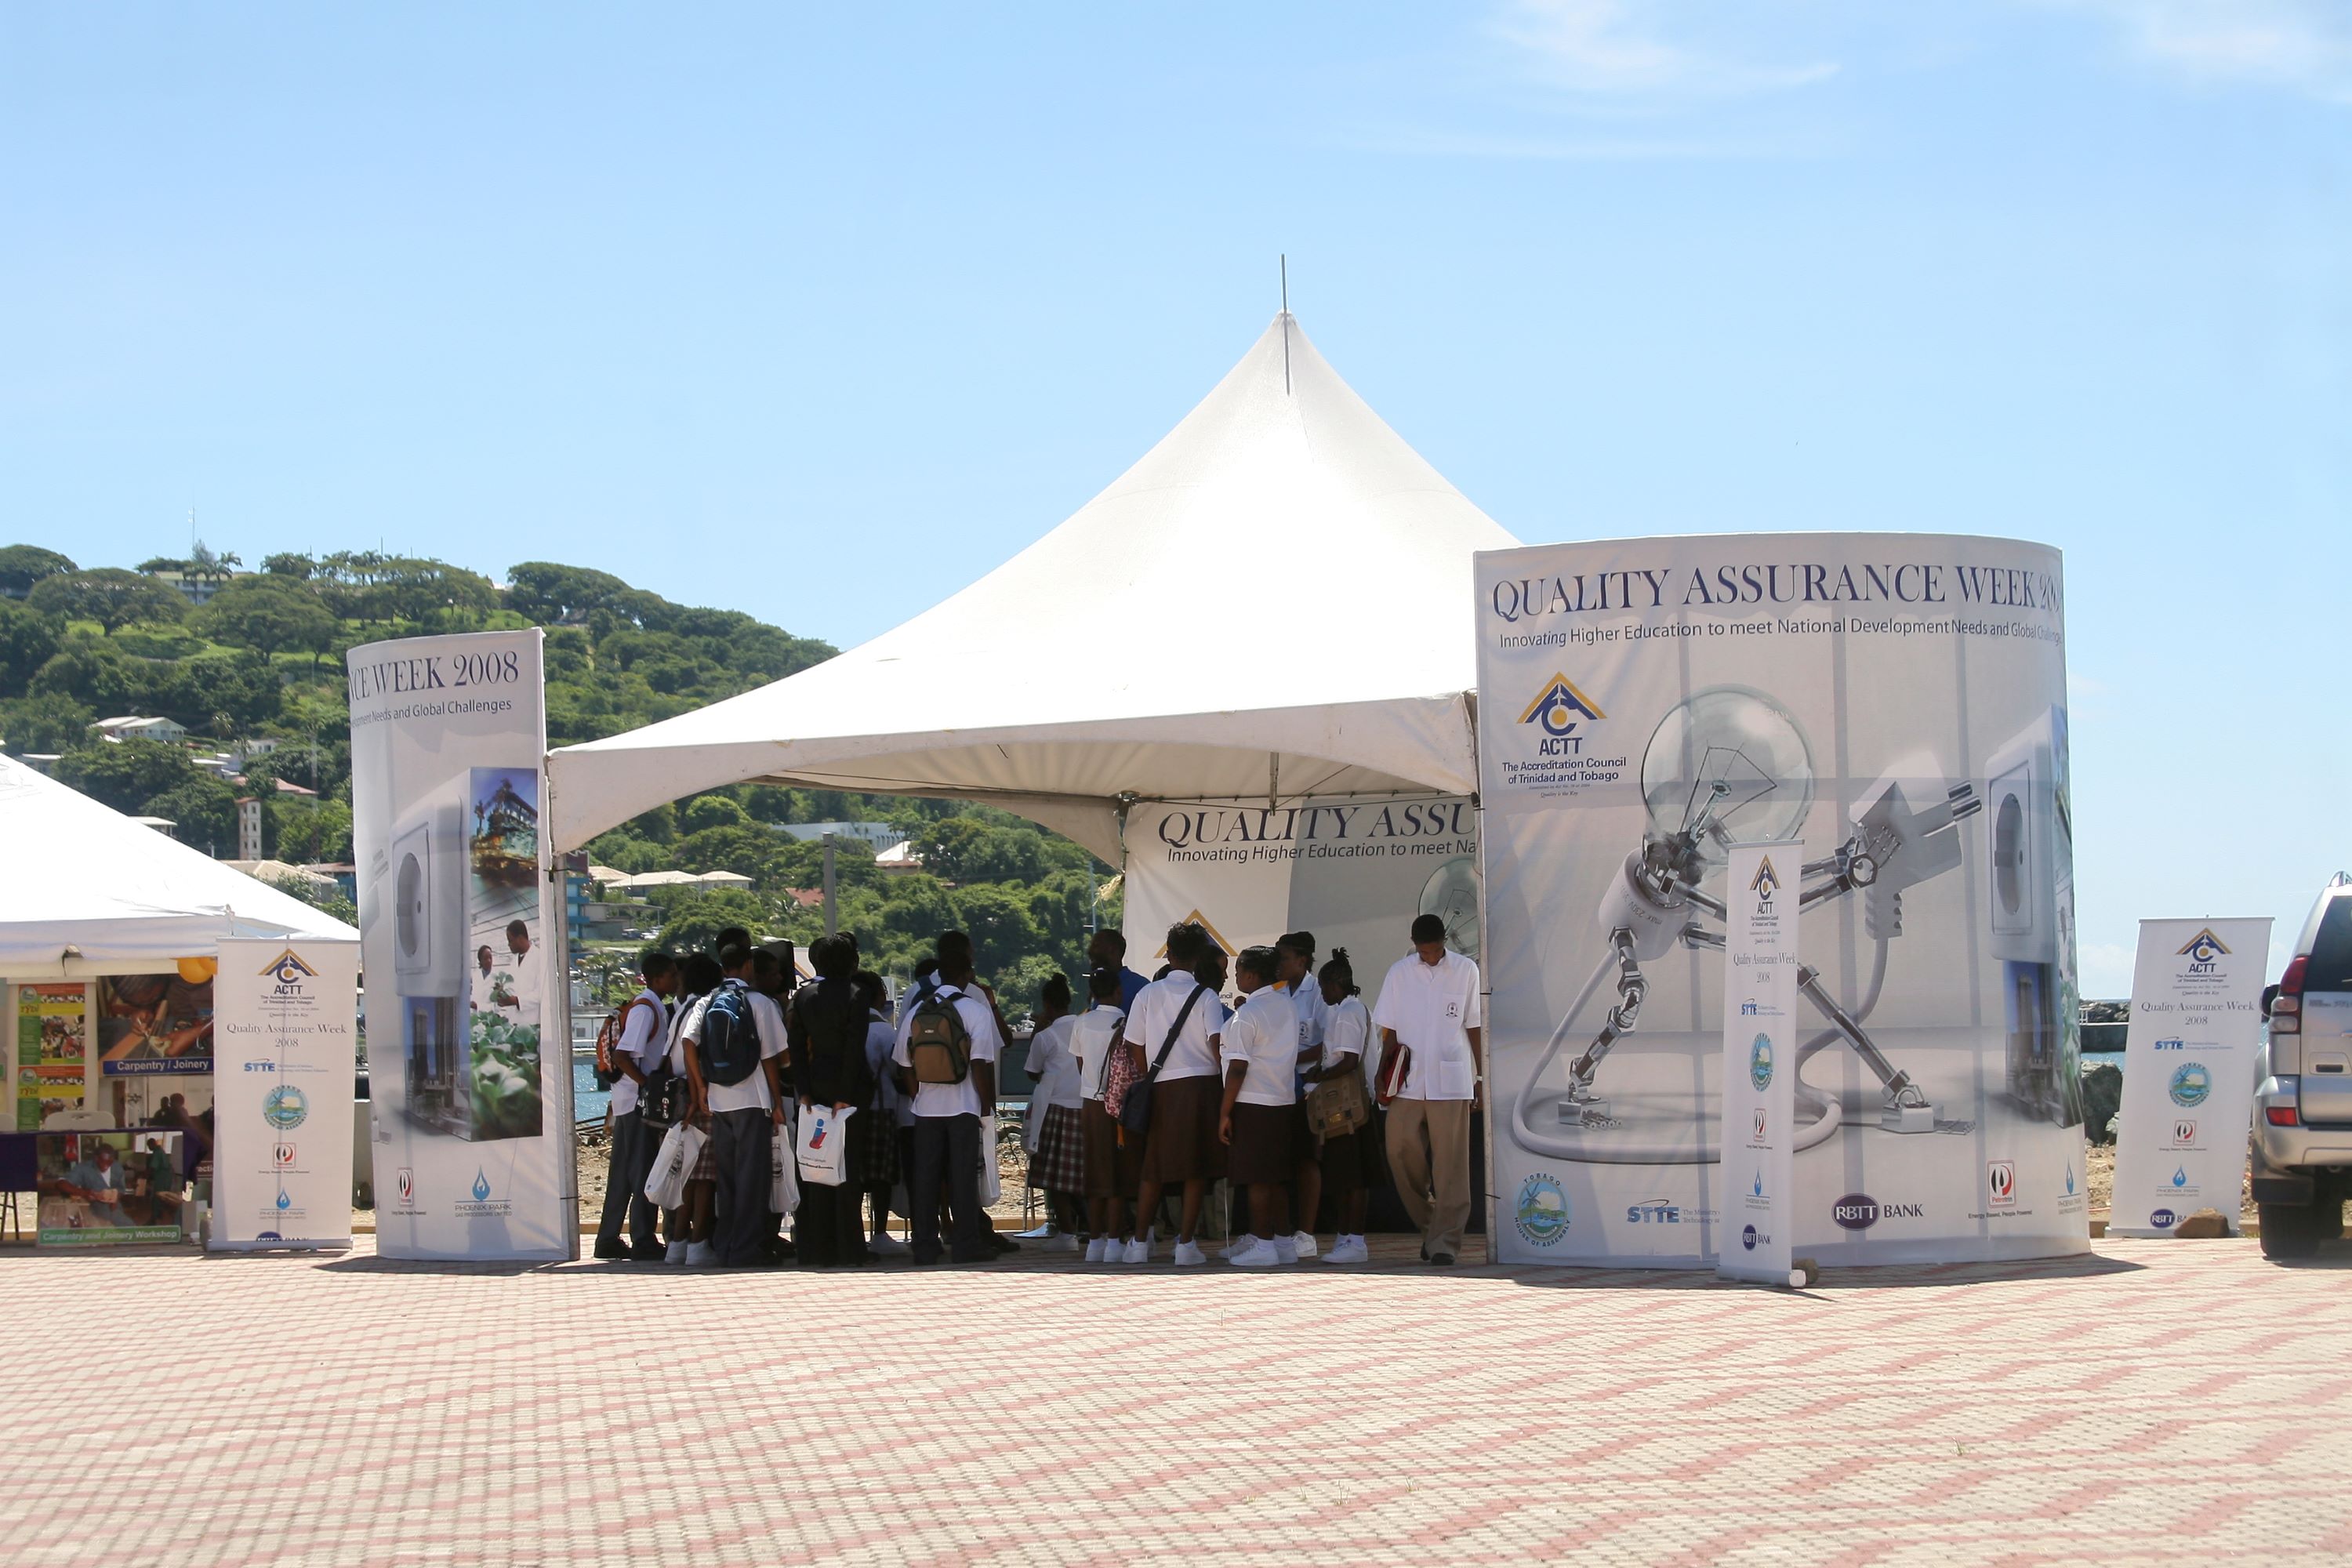 First Quality Assurance Week in Tobago - 2008